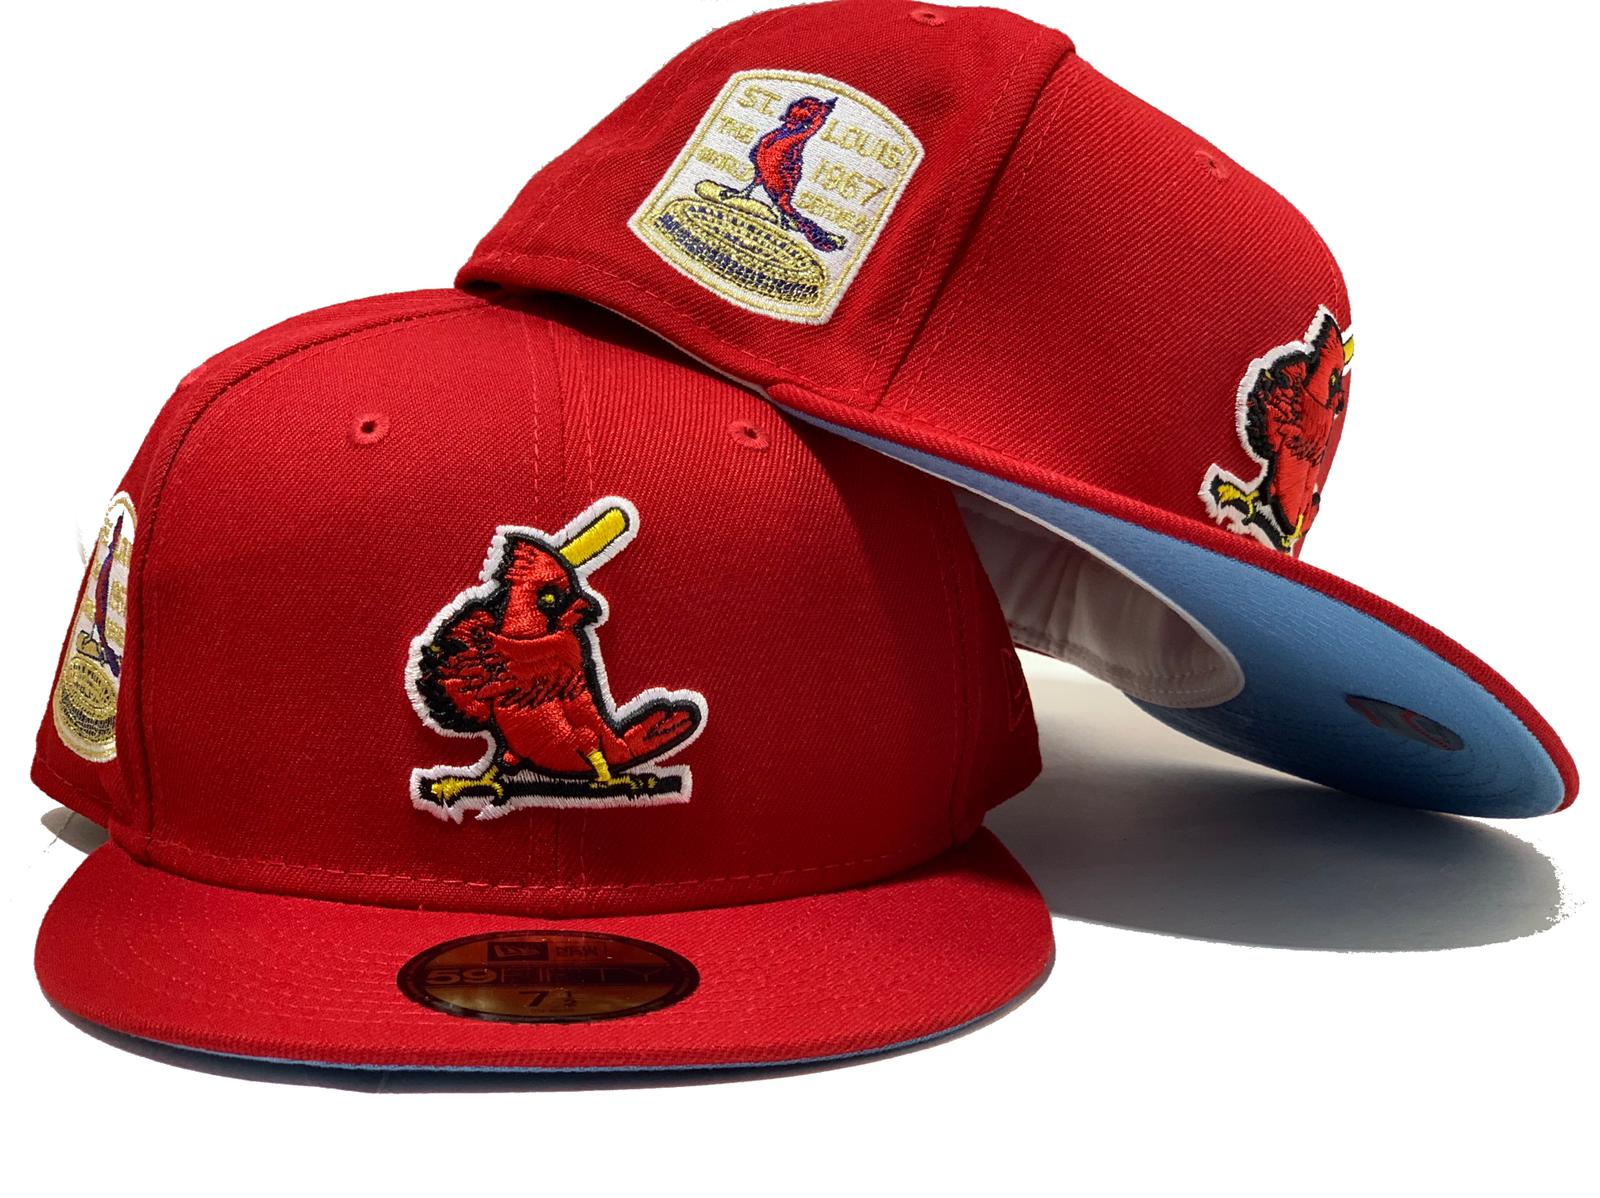 ST. LOUIS CARDINALS 1967 WORLD SERIES RED ICY BRIM NEW ERA FITTED HAT –  Sports World 165